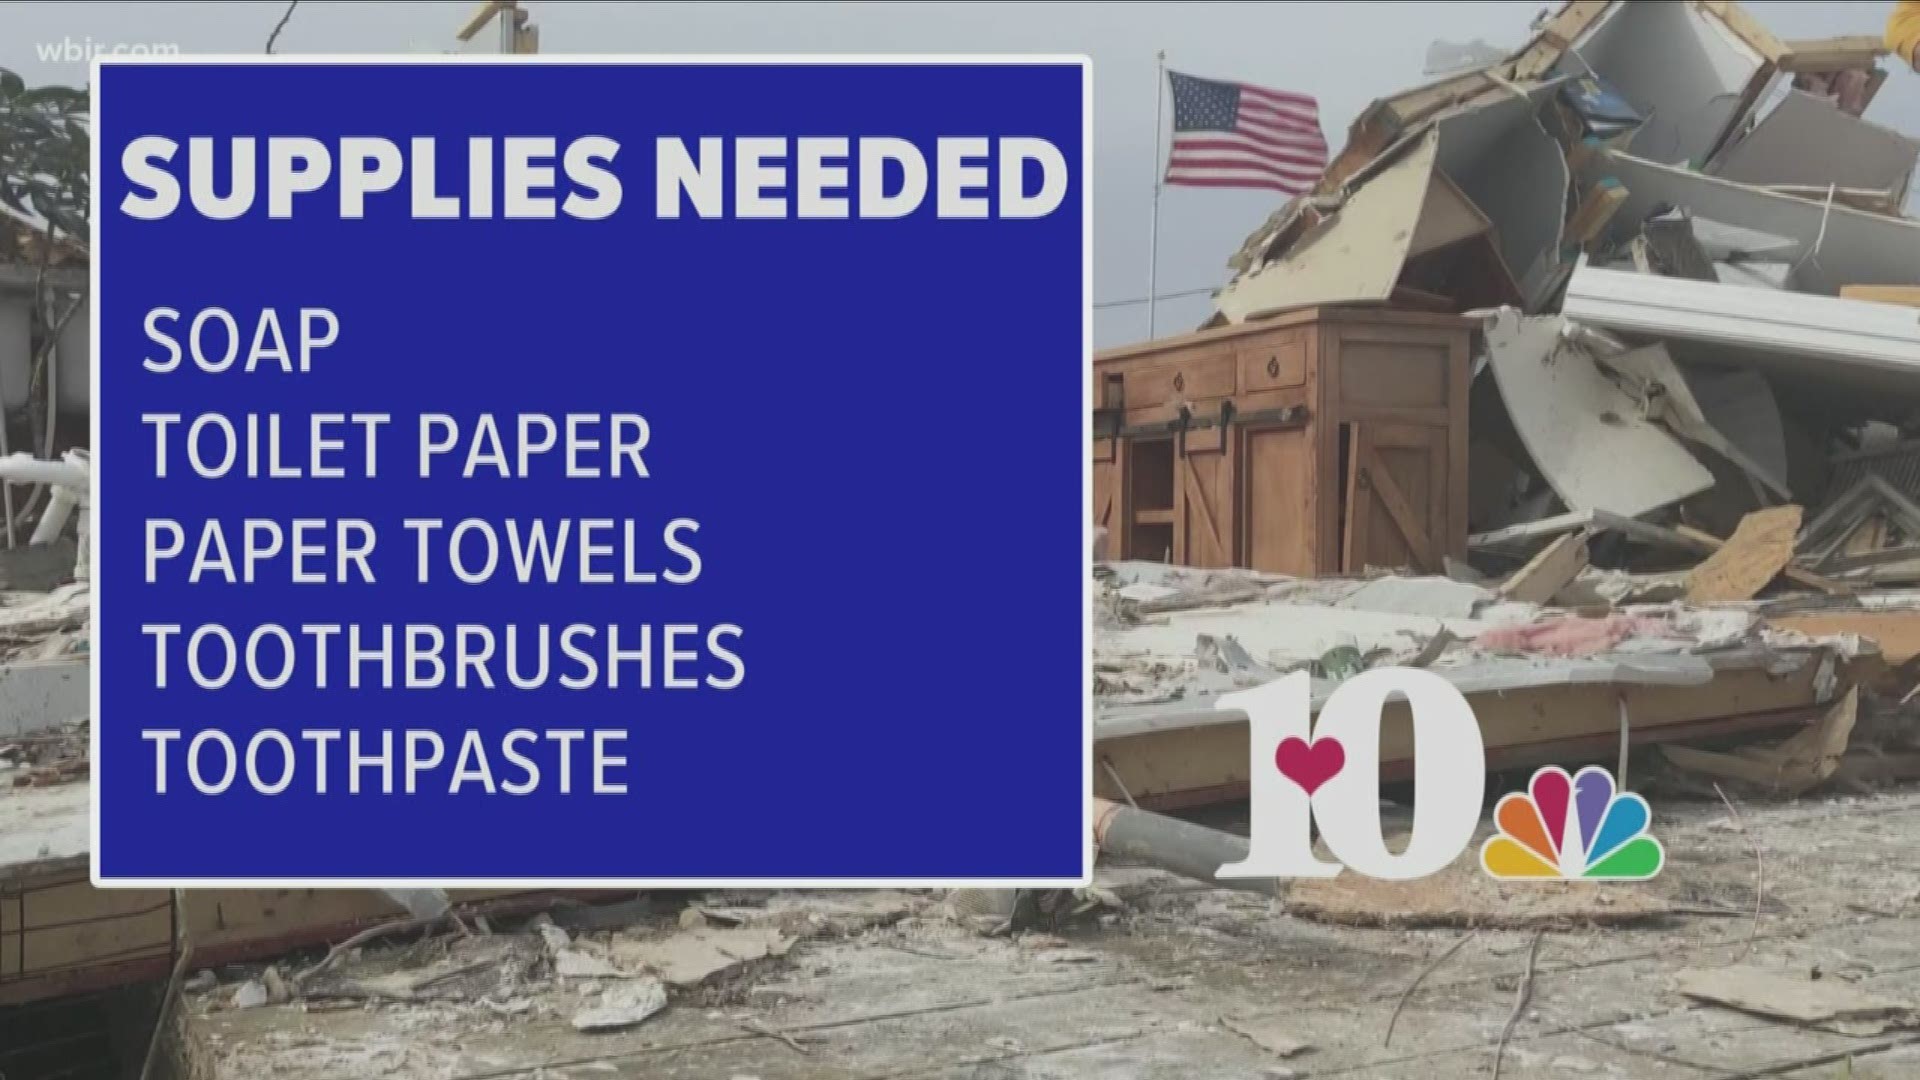 We're teaming up with compassion ministries to host a supply drive for victims in Cookeville.l